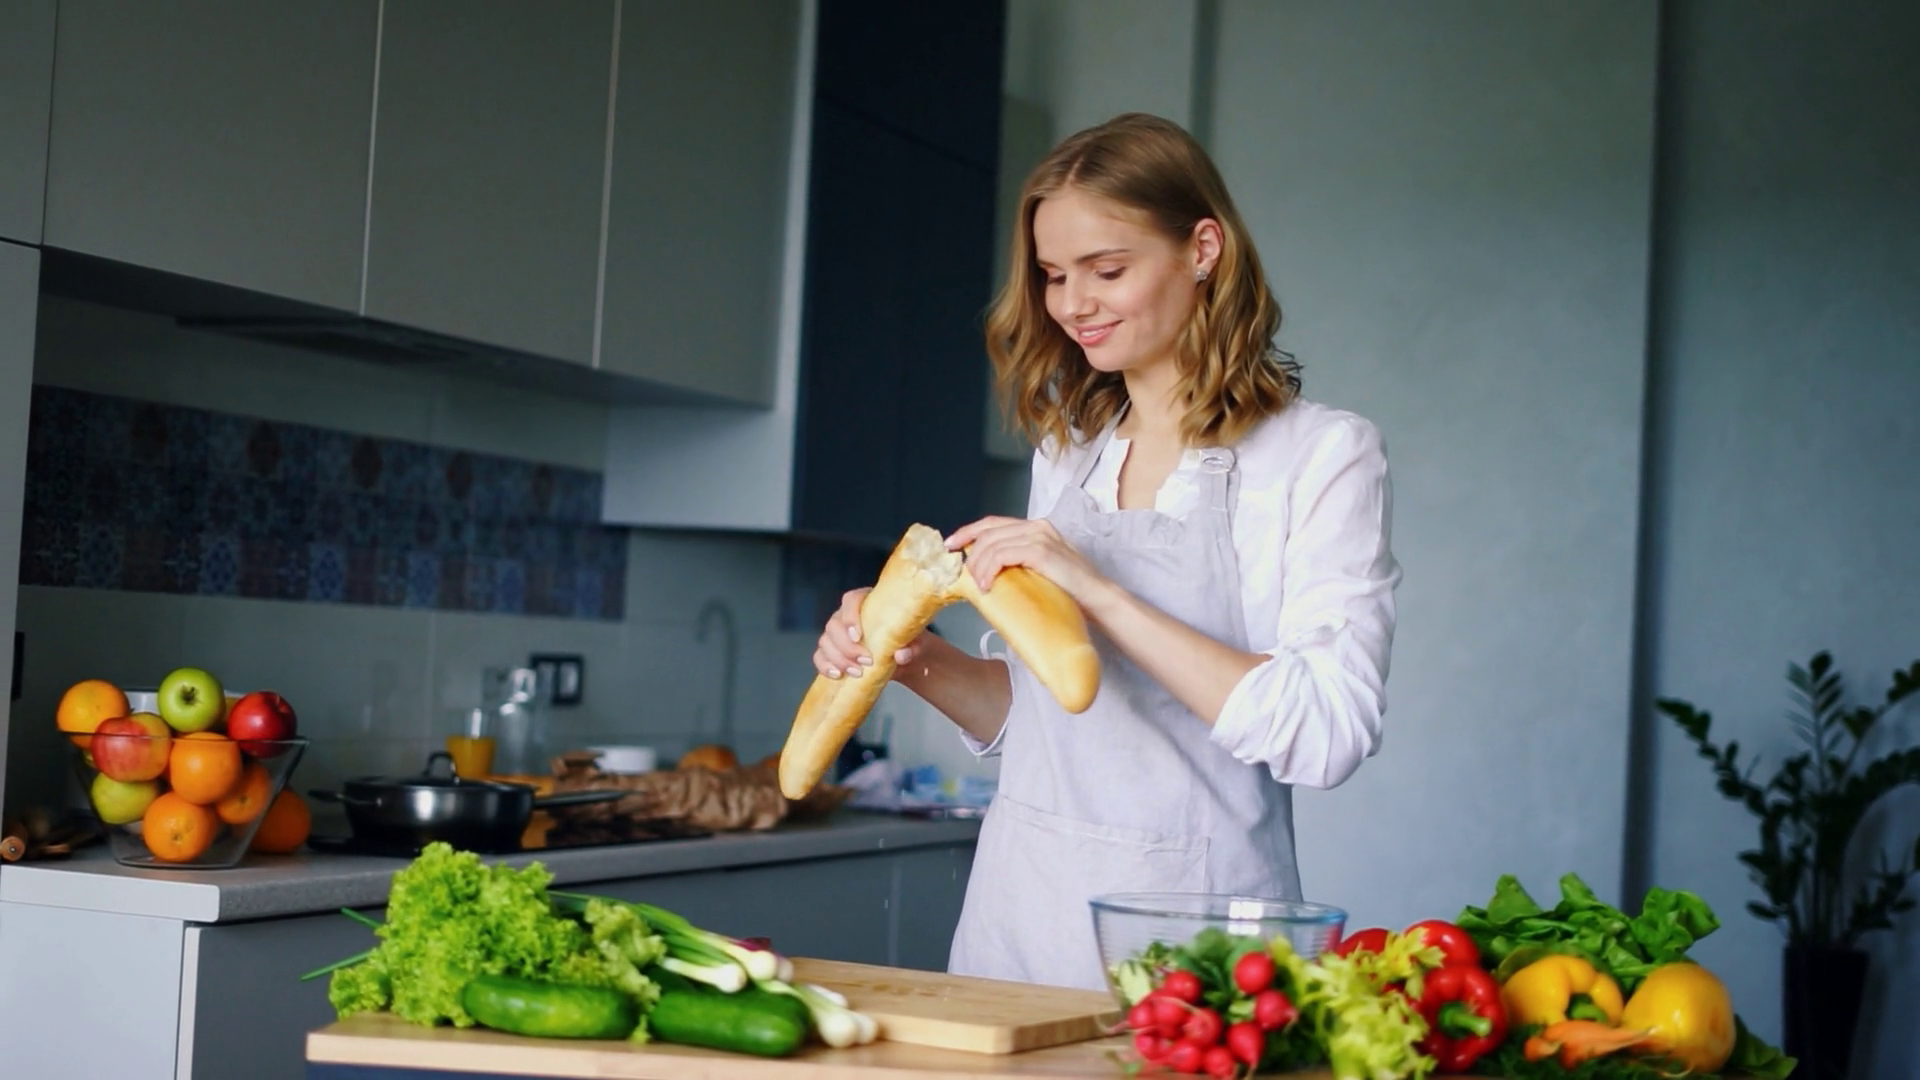 https://dm0qx8t0i9gc9.cloudfront.net/thumbnails/video/Vd3bj2jPe/videoblocks-happy-girl-breaking-and-eating-french-baguette-in-kitchen-woman-tasty-baked-baguette-bread-natural-ingredients-for-healthy-dieting-smiling-girl-eat-healthy-food-healthy-cooking_routqnslq_thumbnail-1080_05.png